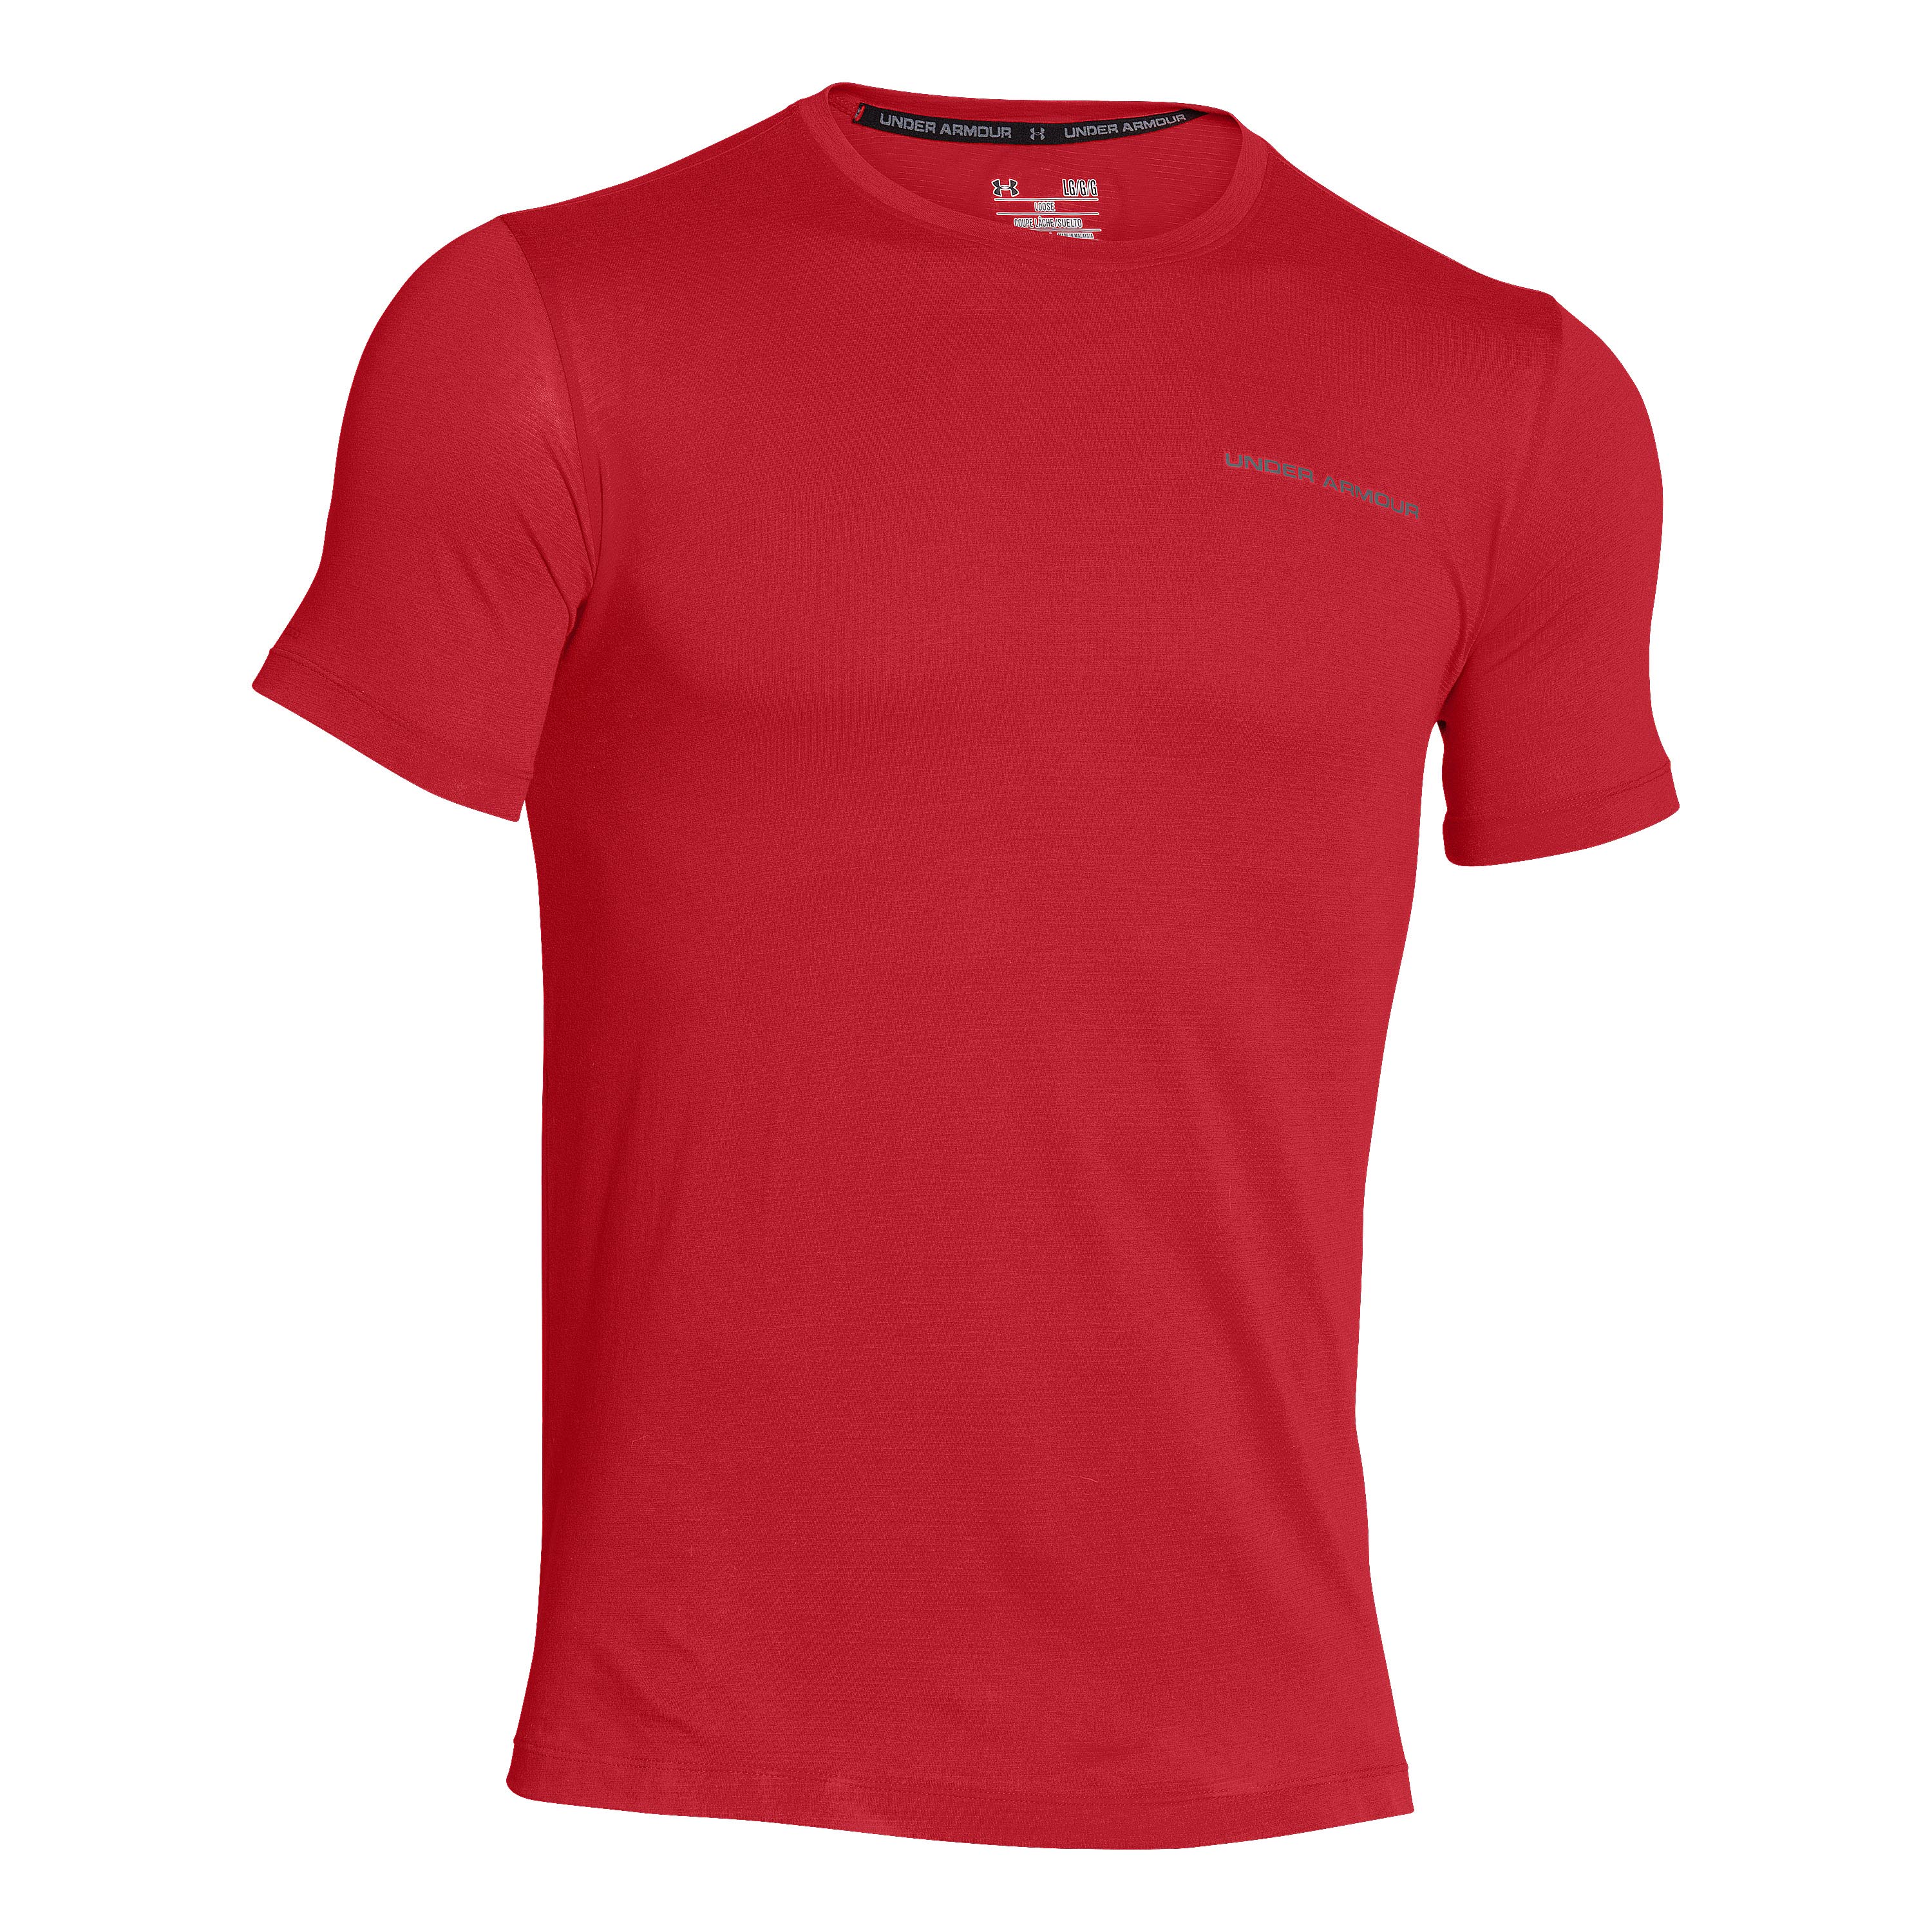 Under Armour T-Shirt Charged Cotton red